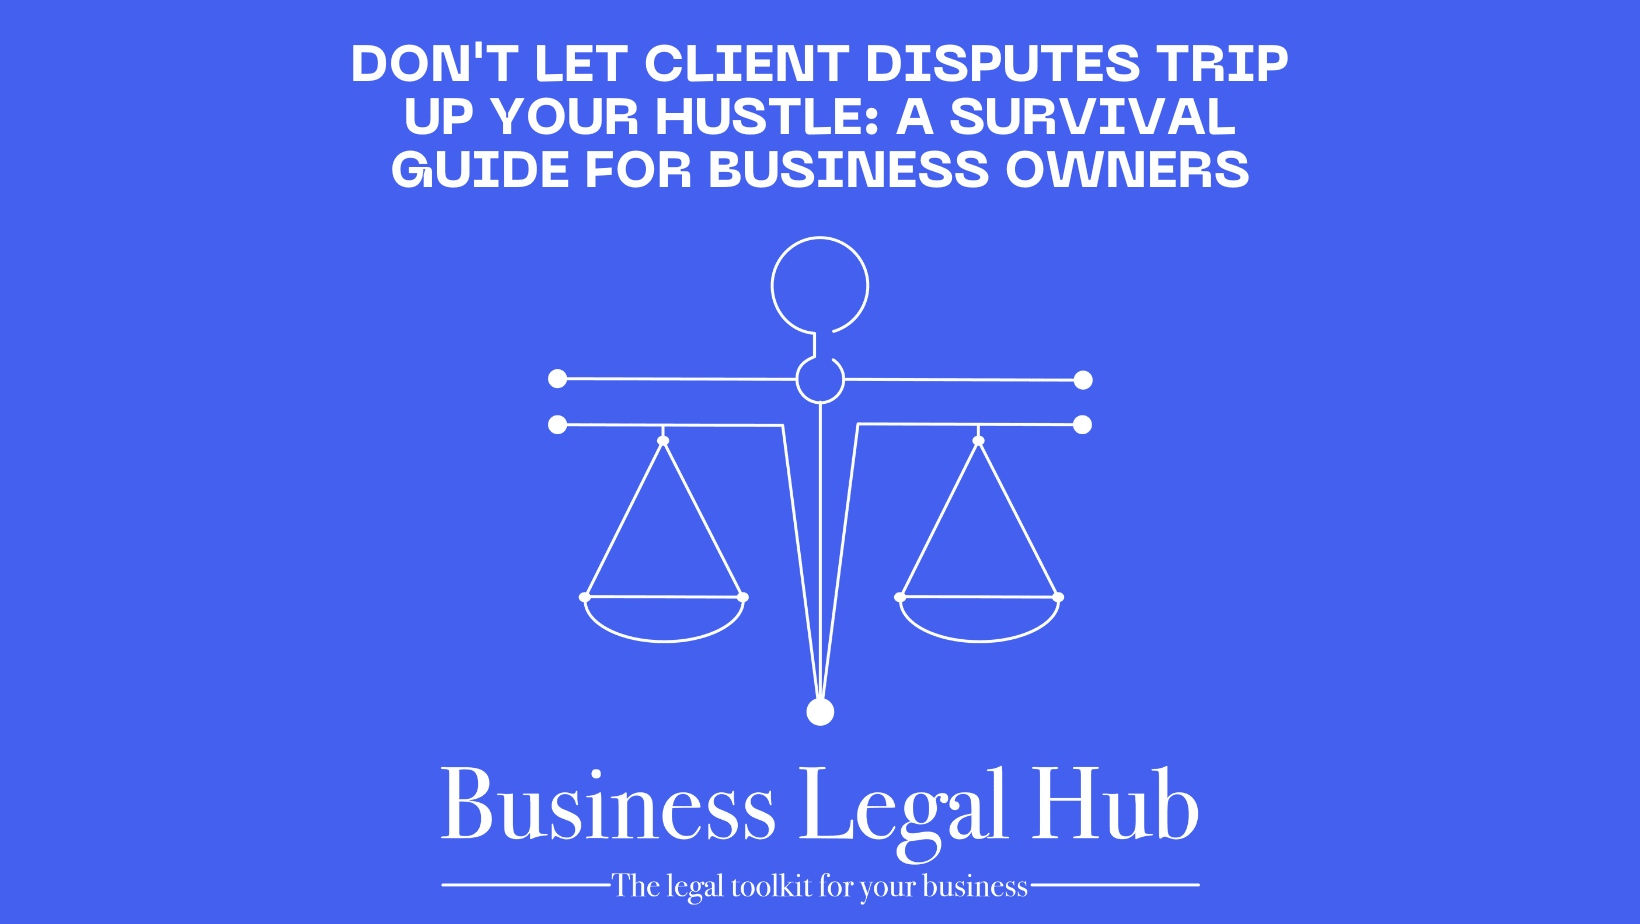 Don't Let Client Disputes Trip Up Your Hustle: A Survival Guide for Business Owners - Business Legal Hub